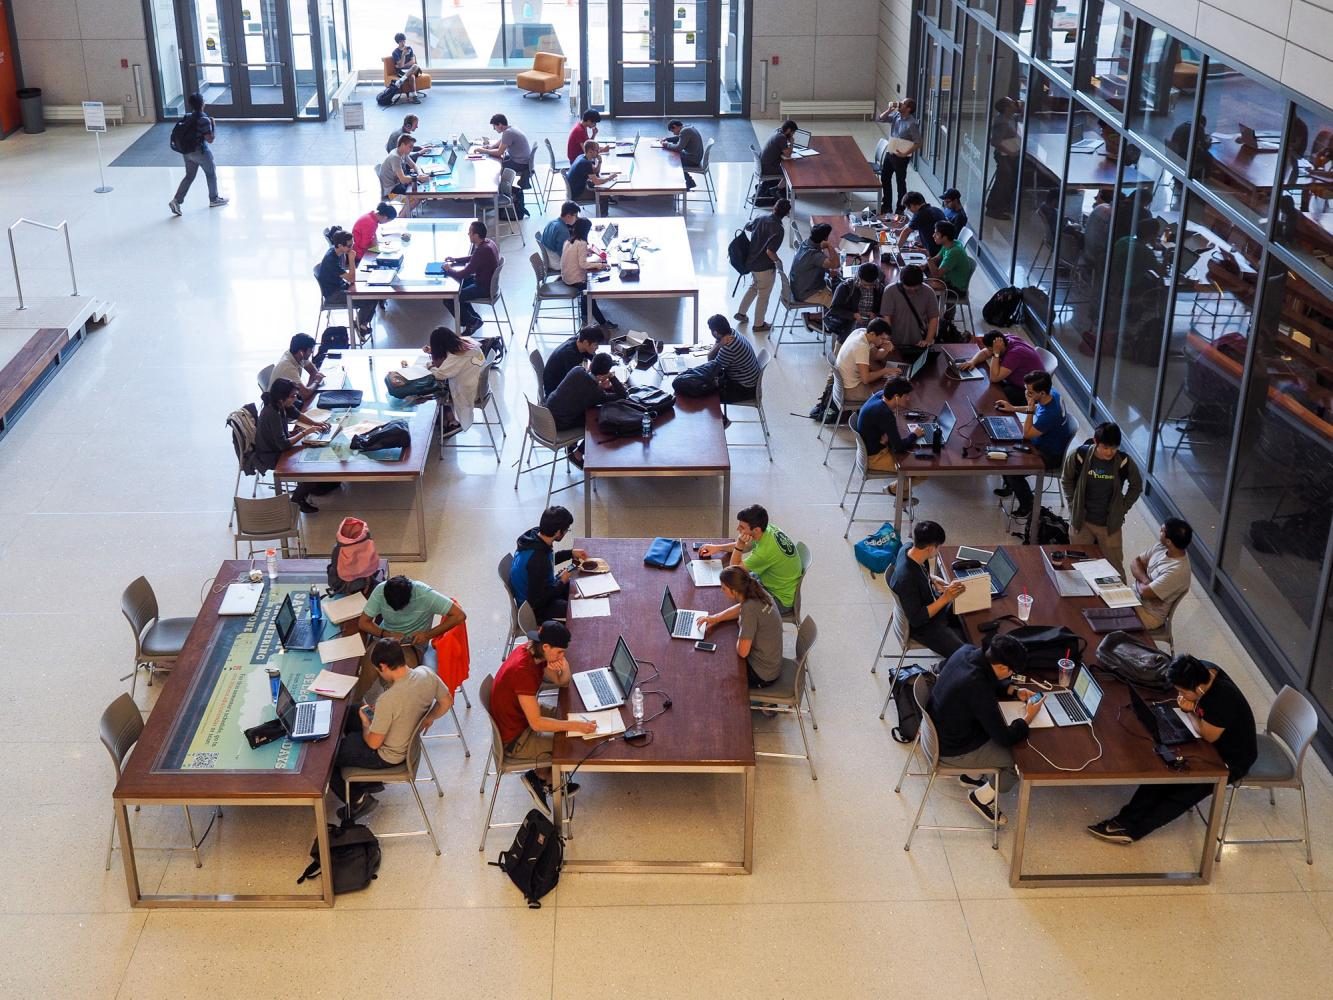 Students study in the Electrical and Computer Engineering Building in Champaign, IL. October 4, 2016.